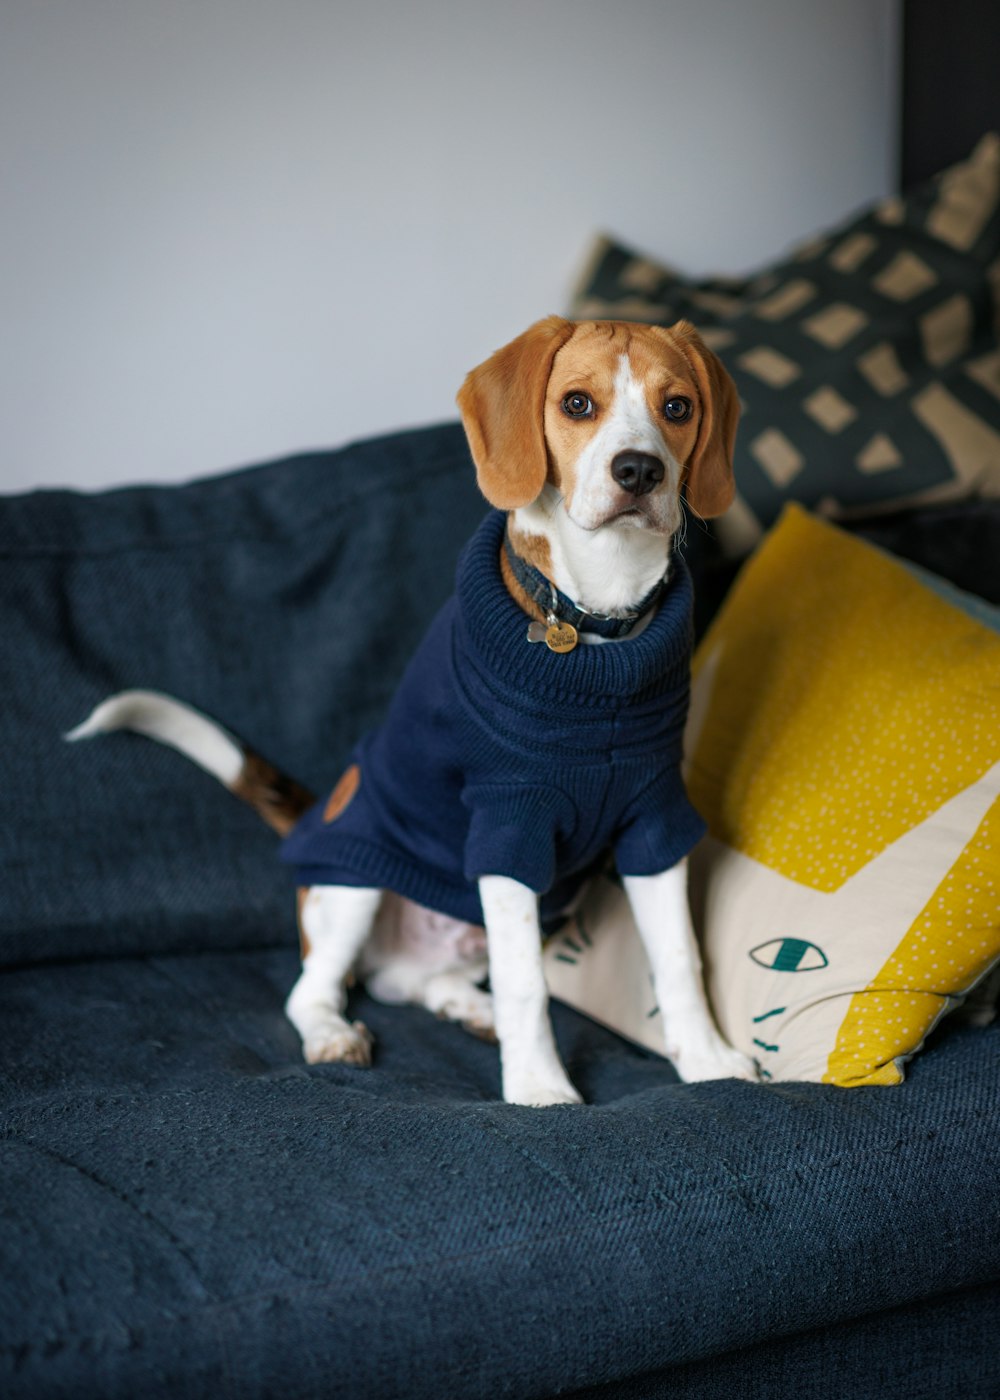 a dog wearing a sweater sitting on a couch